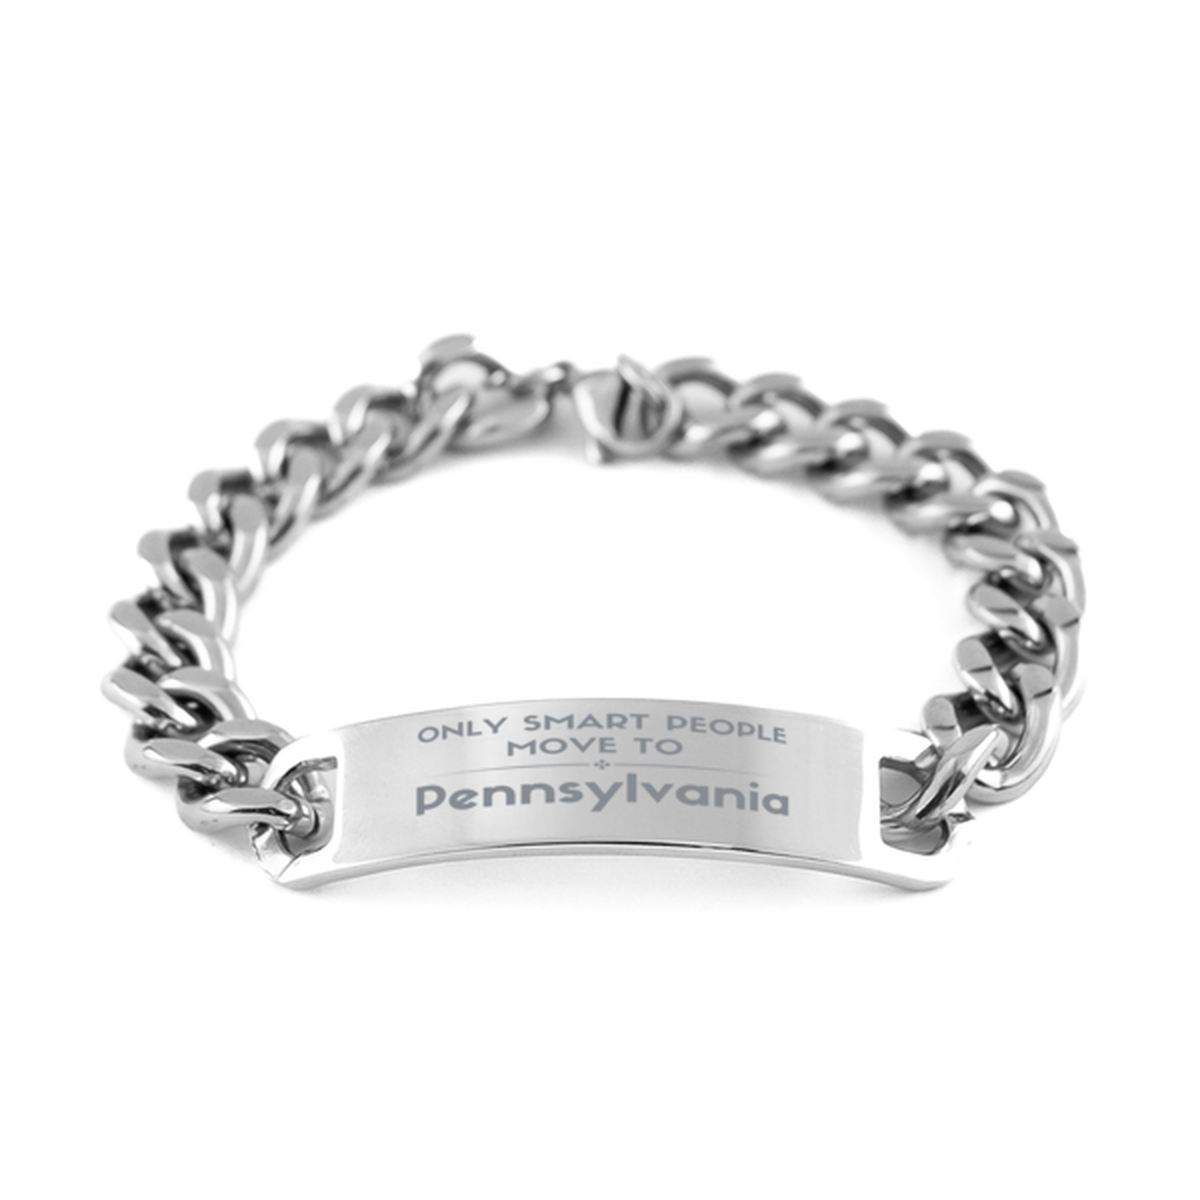 Only smart people move to Pennsylvania Cuban Chain Stainless Steel Bracelet, Gag Gifts For Pennsylvania, Move to Pennsylvania Gifts for Friends Coworker Funny Saying Quote